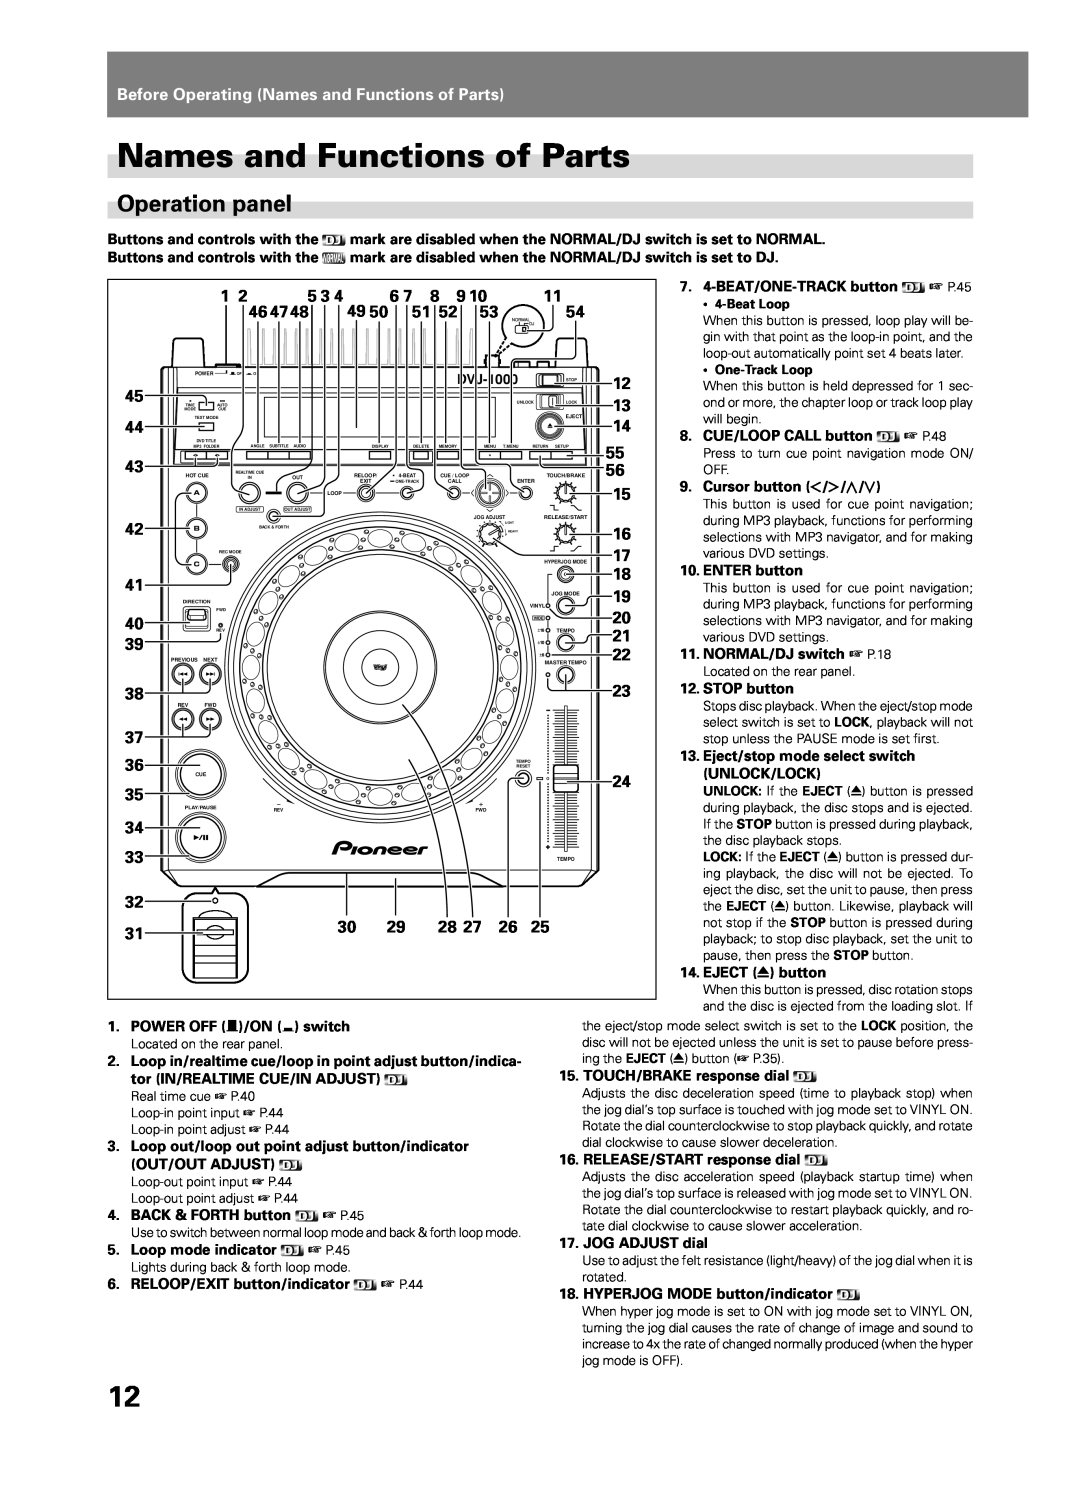 Pioneer DVJ-1000 manual Names and Functions of Parts, Operation panel 